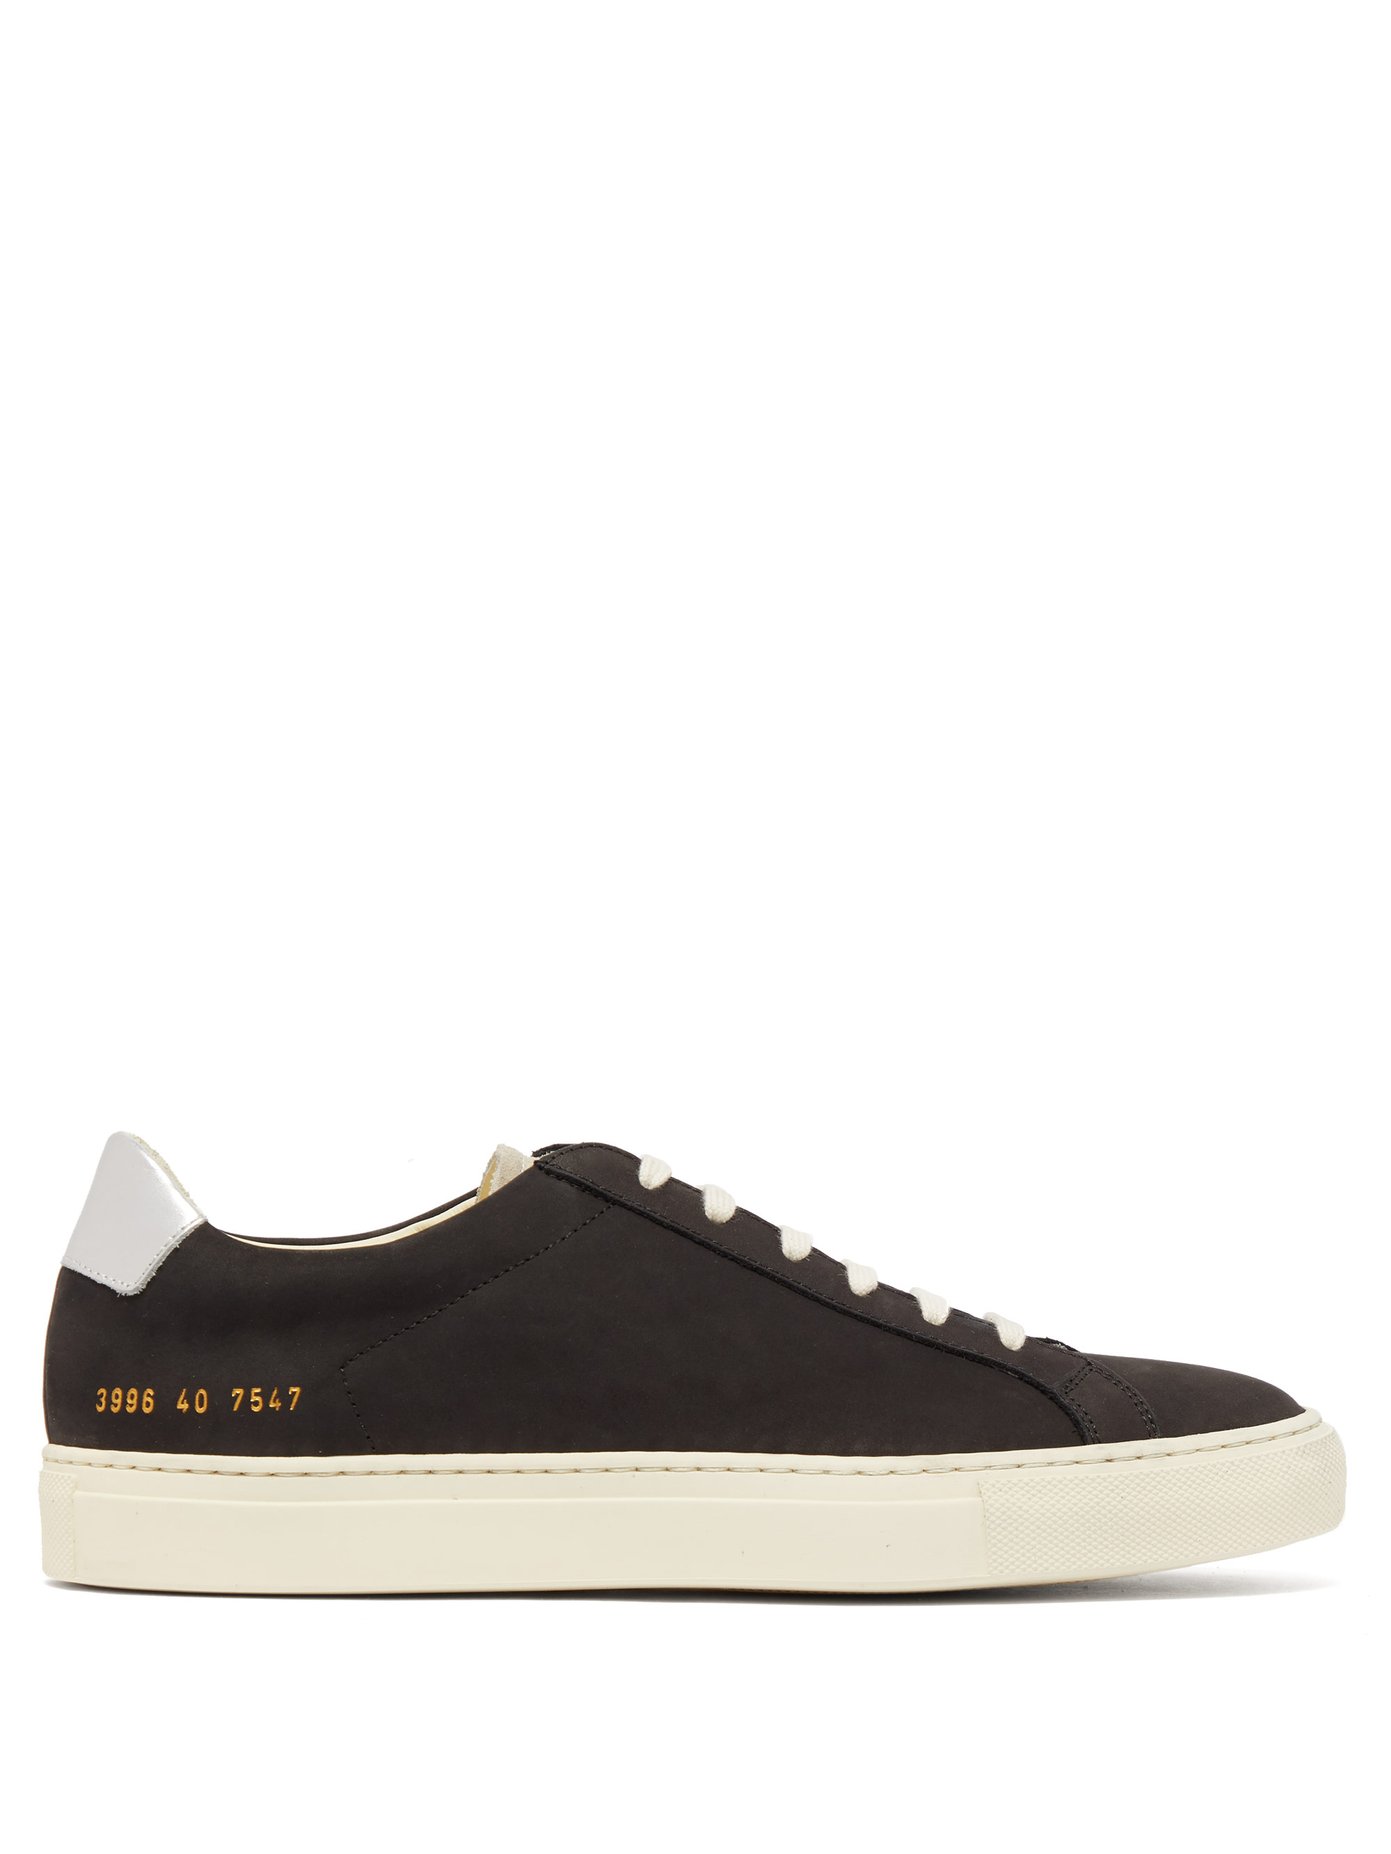 common projects half sizes